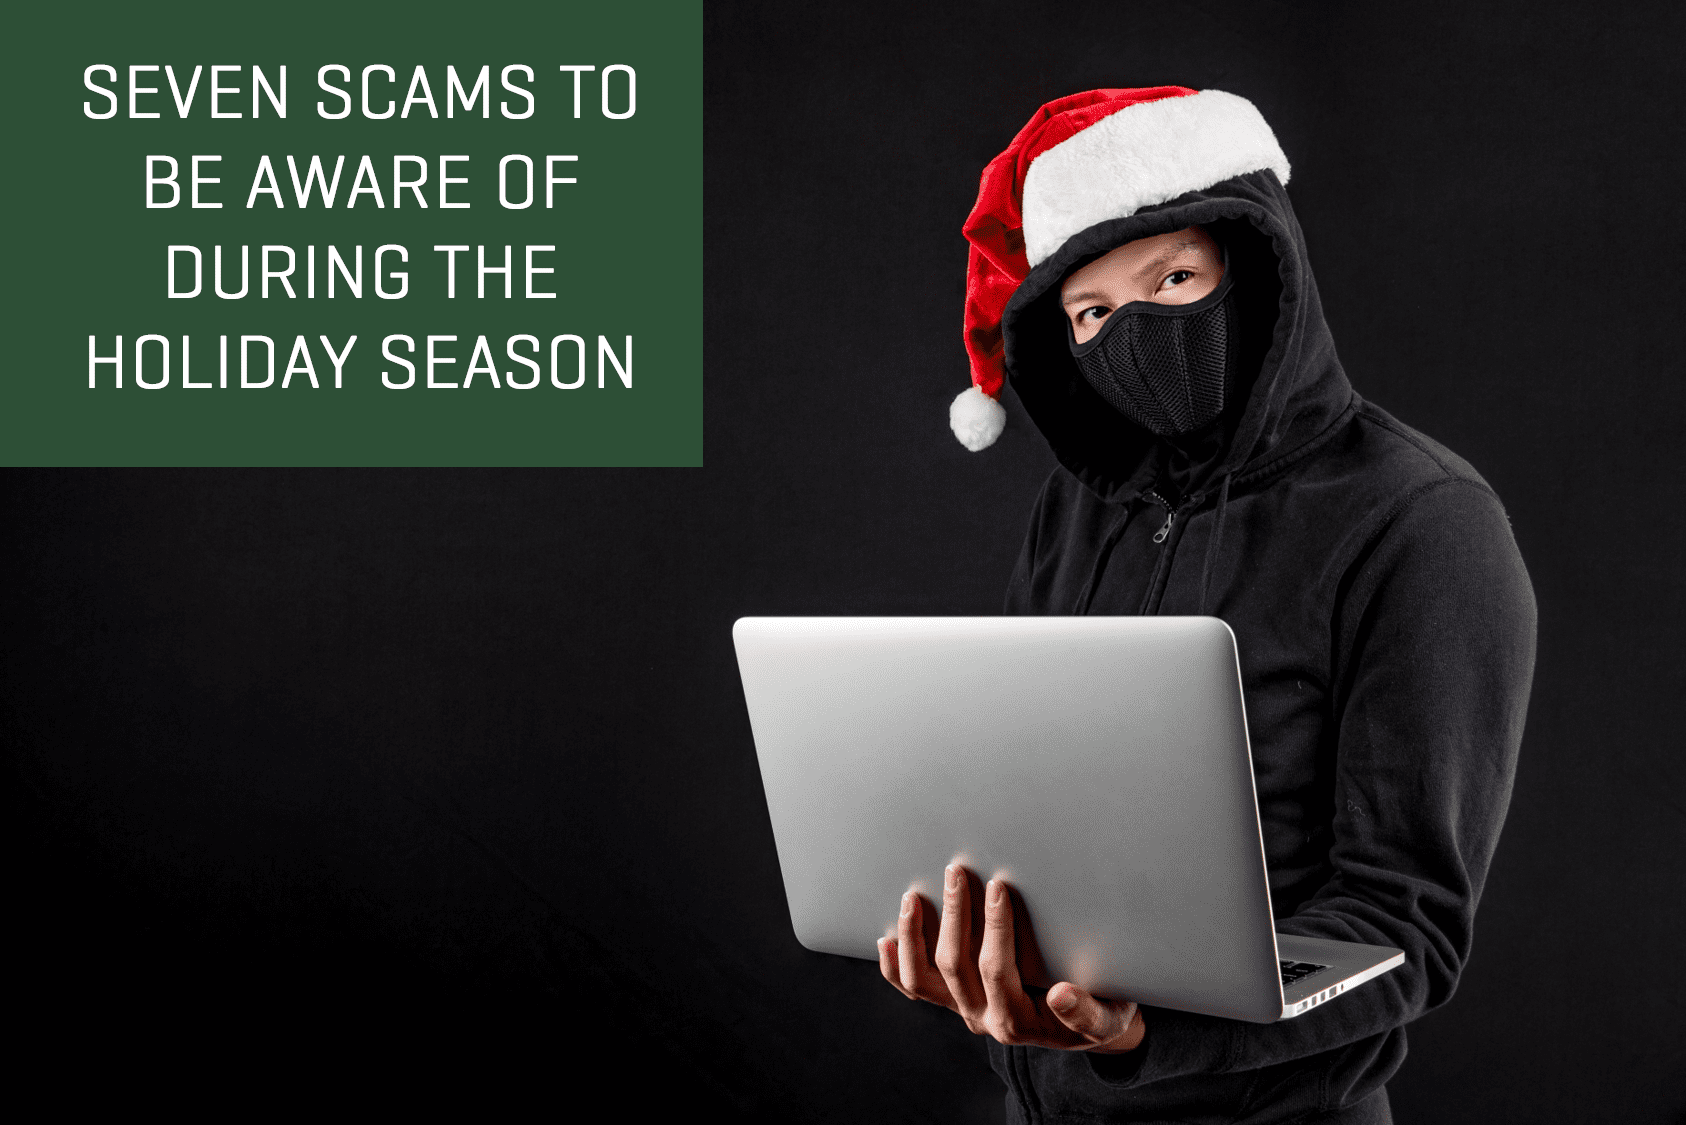 Seven Scams to be Aware of During the Holiday Season First Southern